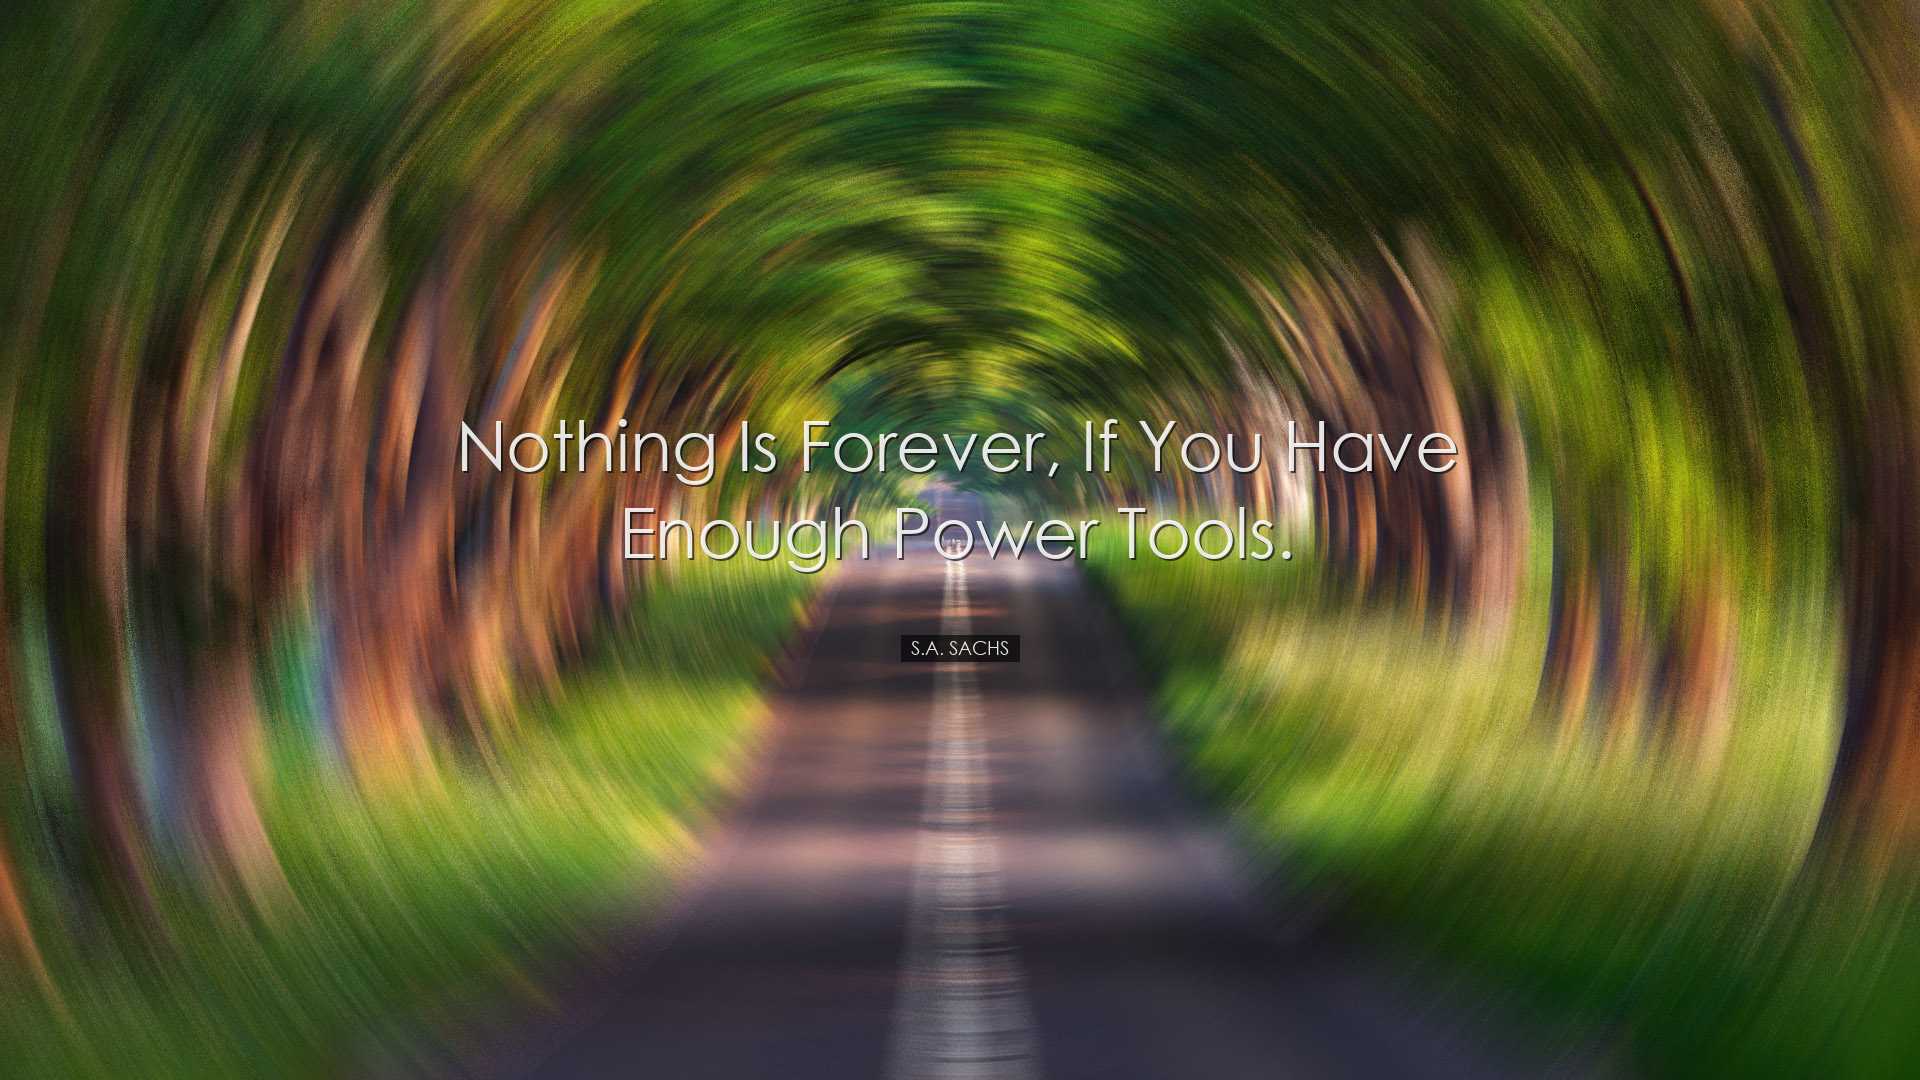 Nothing is forever, if you have enough power tools. - S.A. Sachs